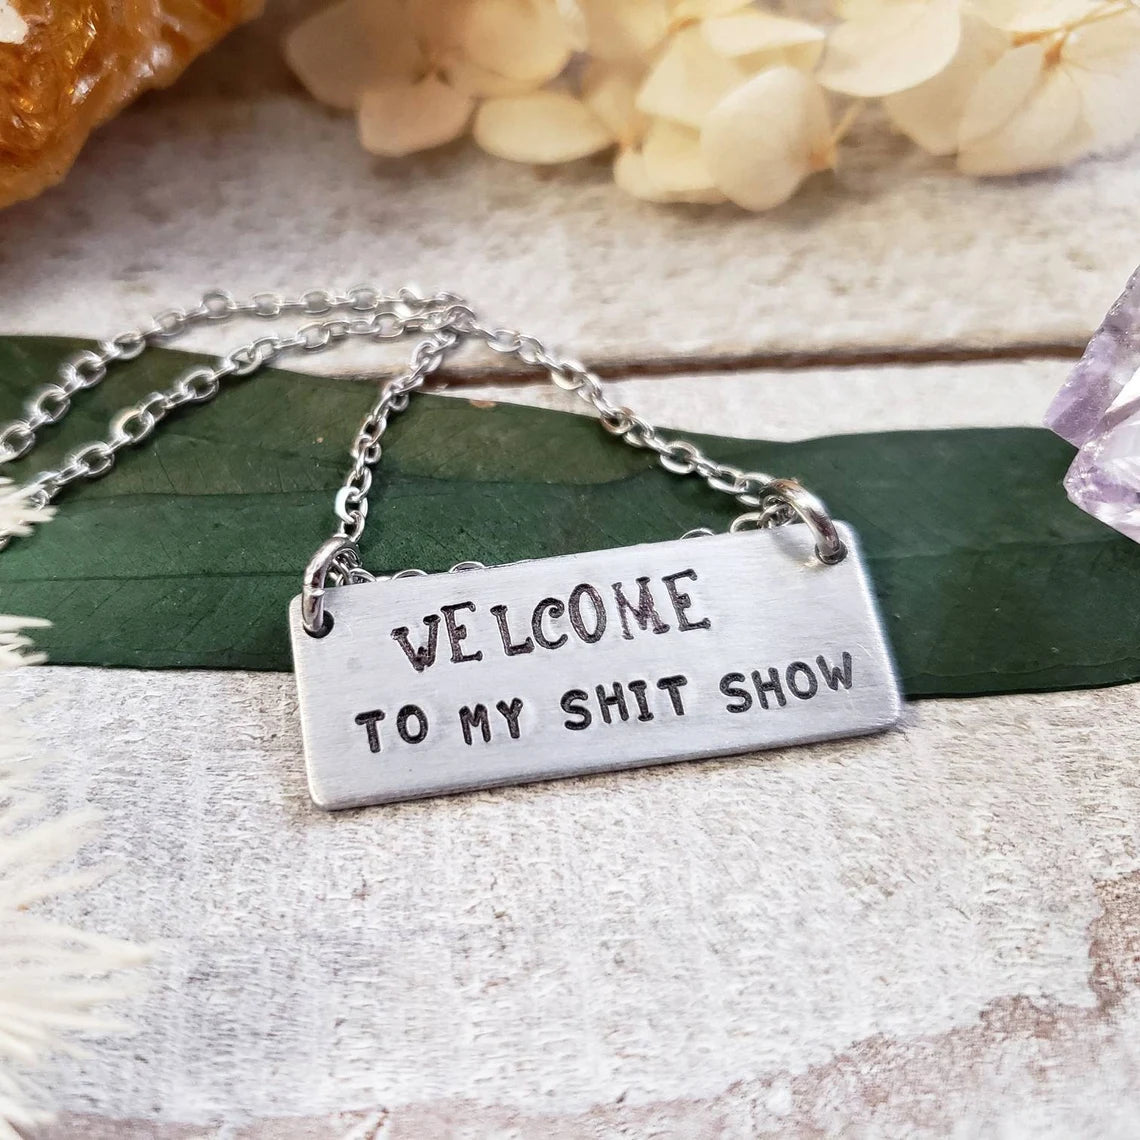 Welcome to my sh*t show necklace